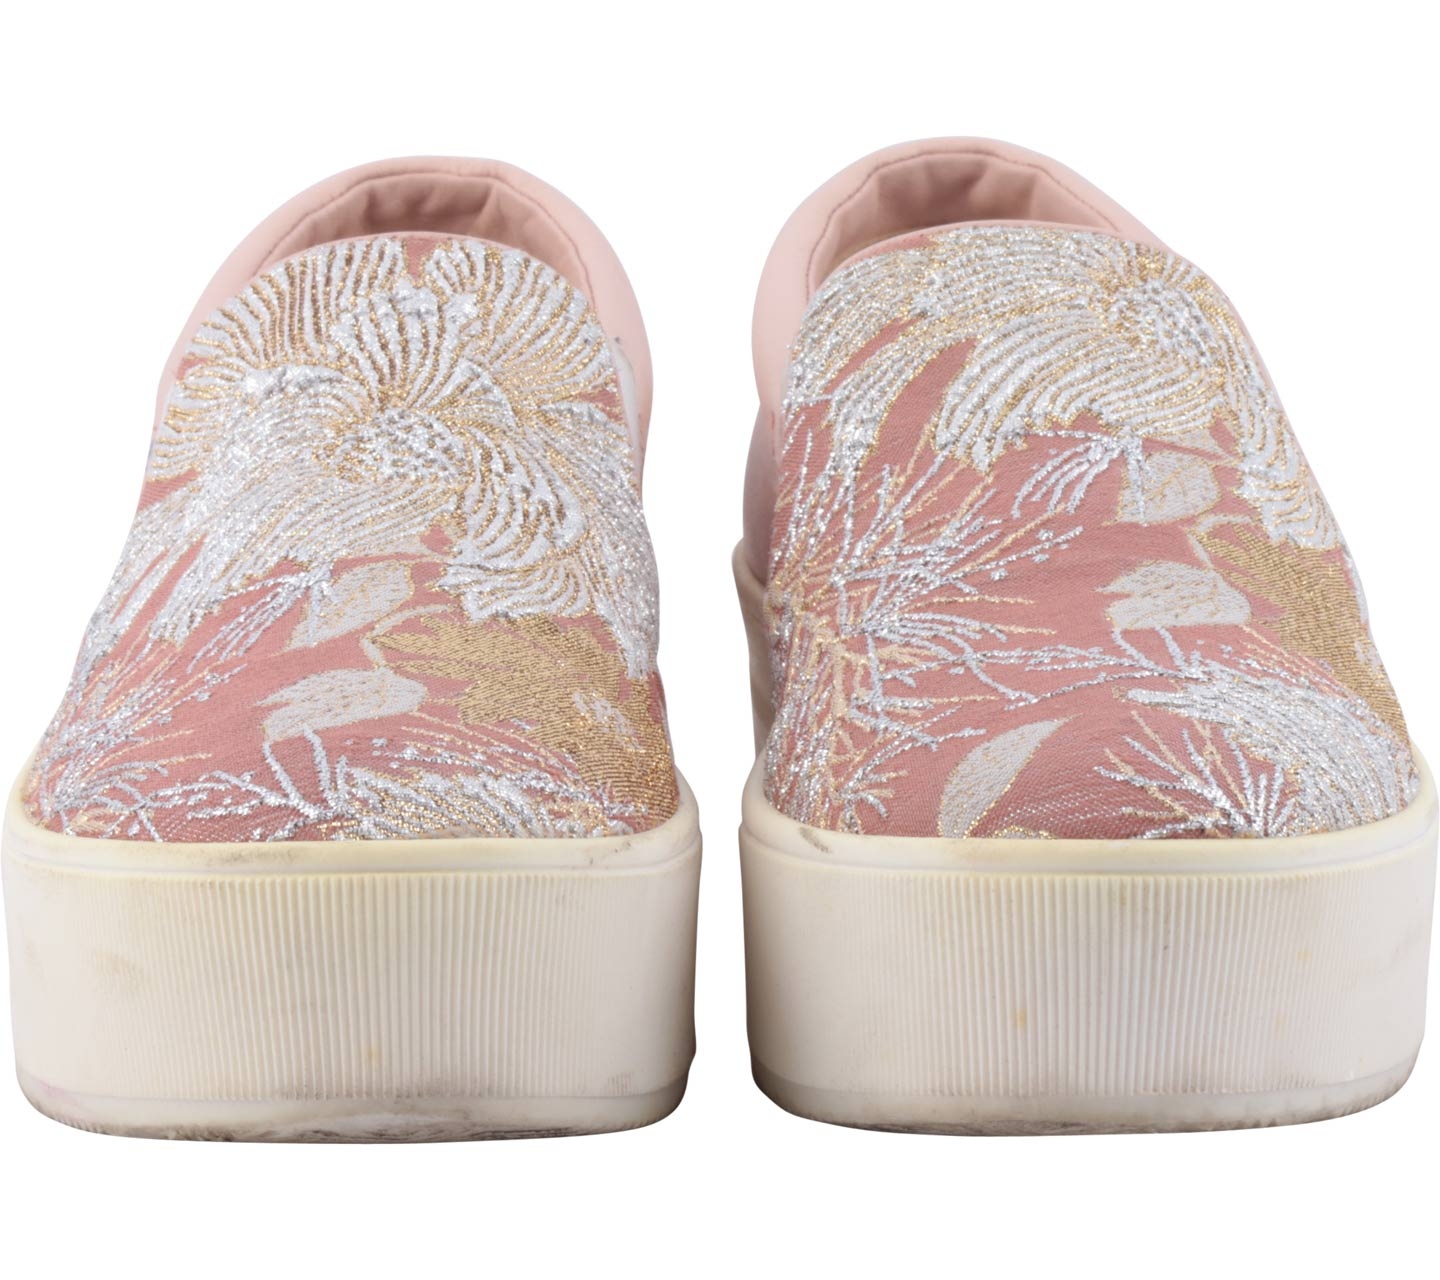 N°21 Pink And Off White Brocade Flats